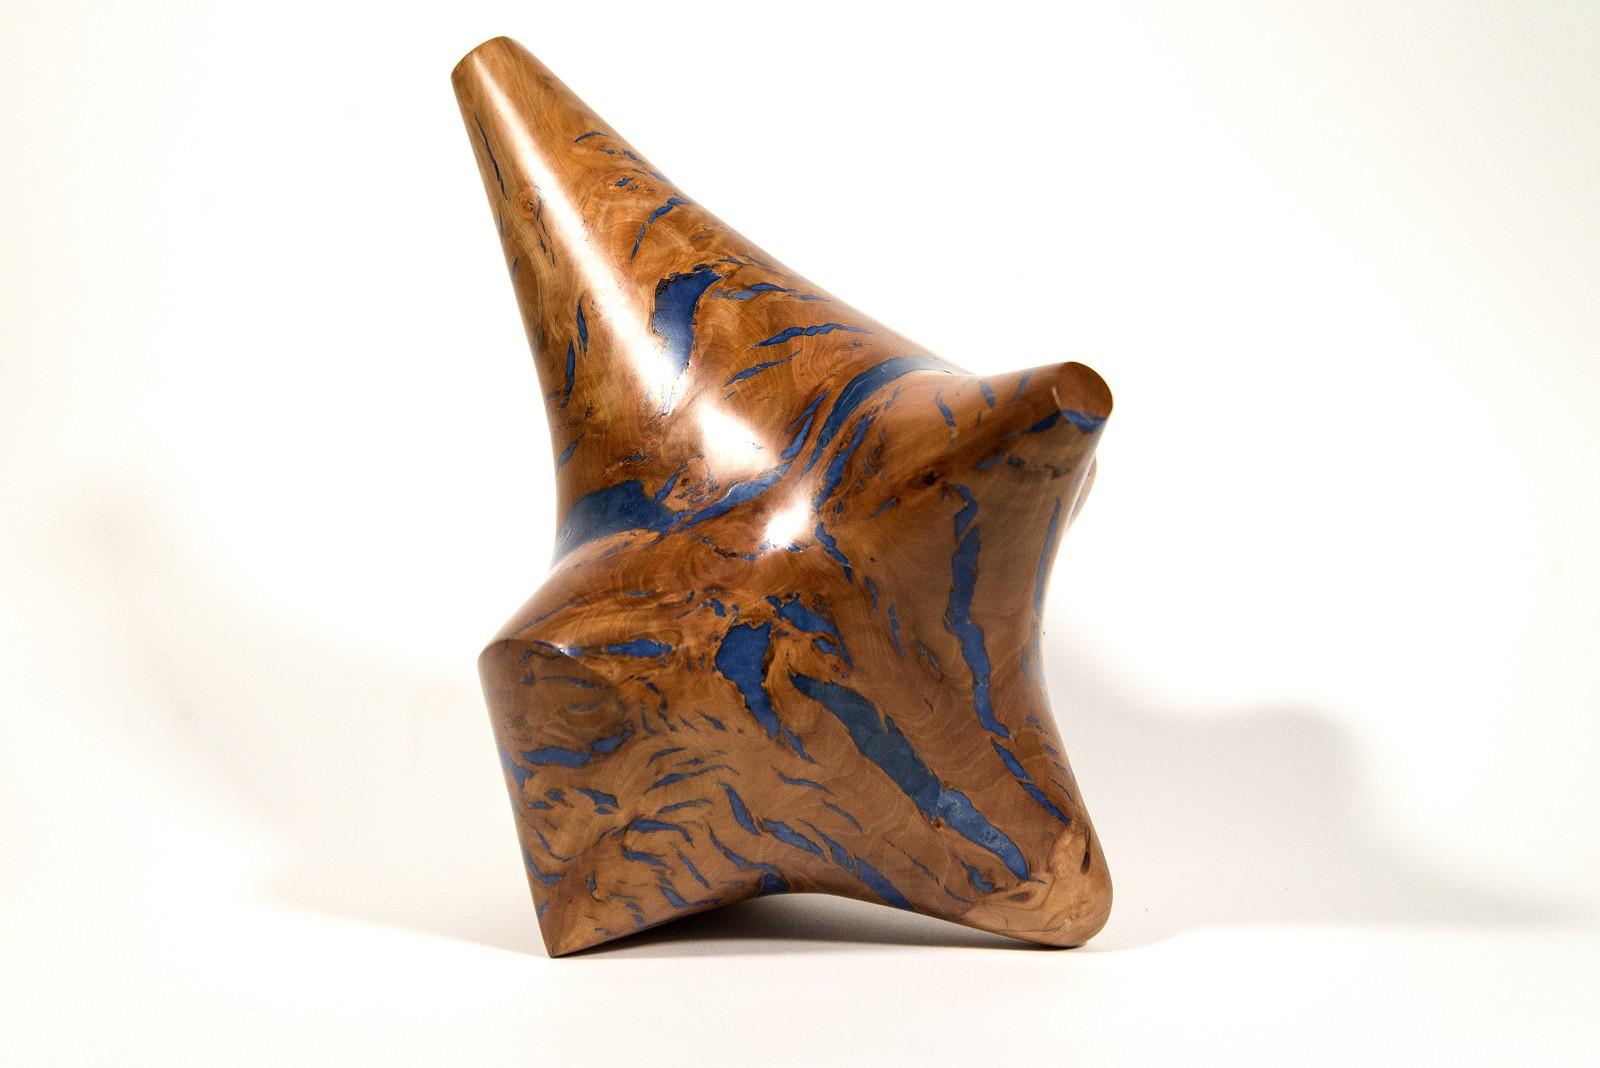 Windfall Series II No 8 - smooth, carved, abstract, Applewood & resin sculpture - Sculpture by Shayne Dark